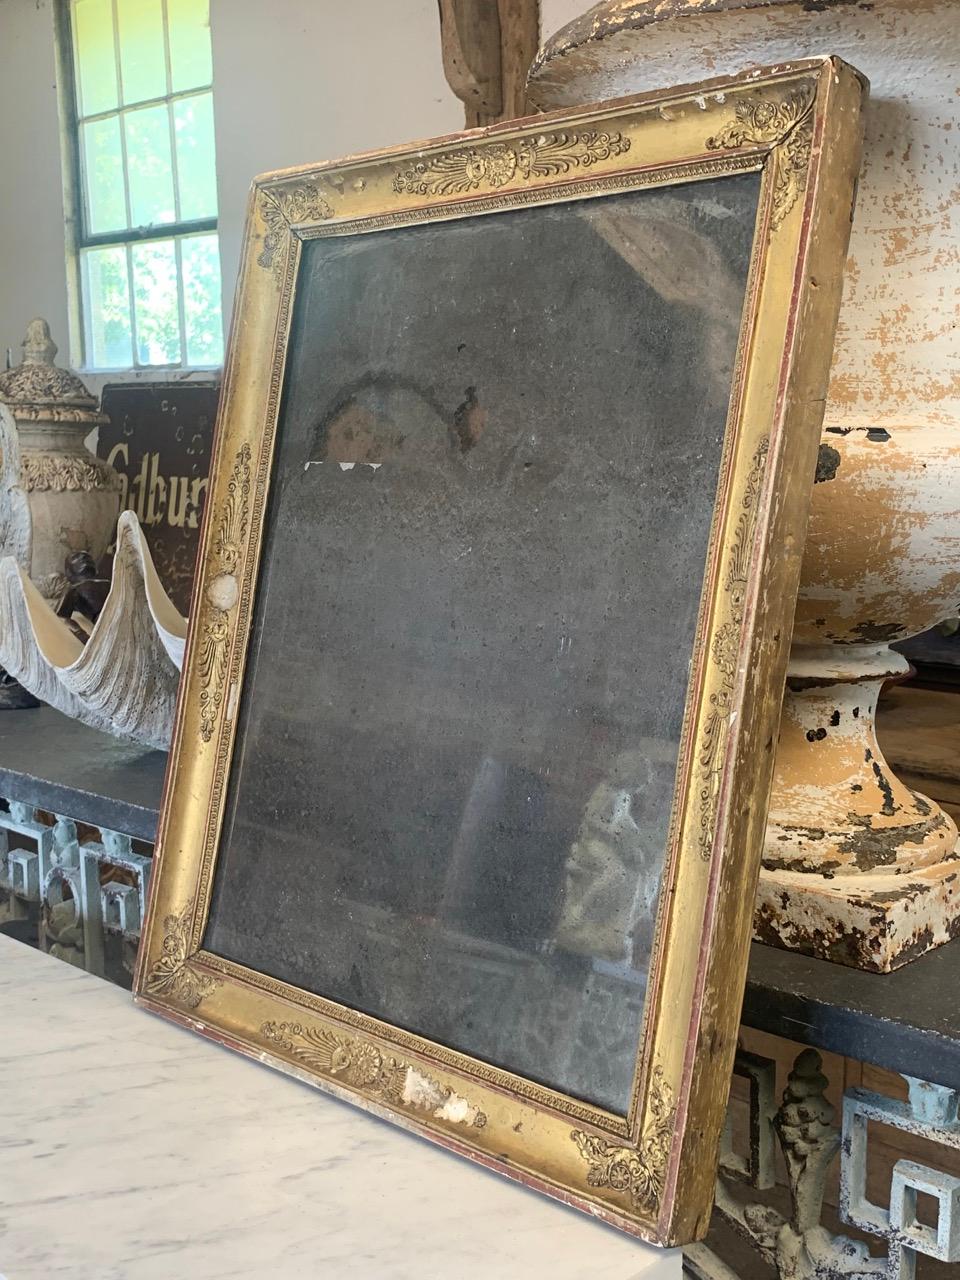 A lovely 19th century French gilt framed mirror in nice distressed condition with original foxed glass mirror plate. The wood and gesso frame has nice wear to the gilding giving it a great decorative look. It has its original pine back boards.